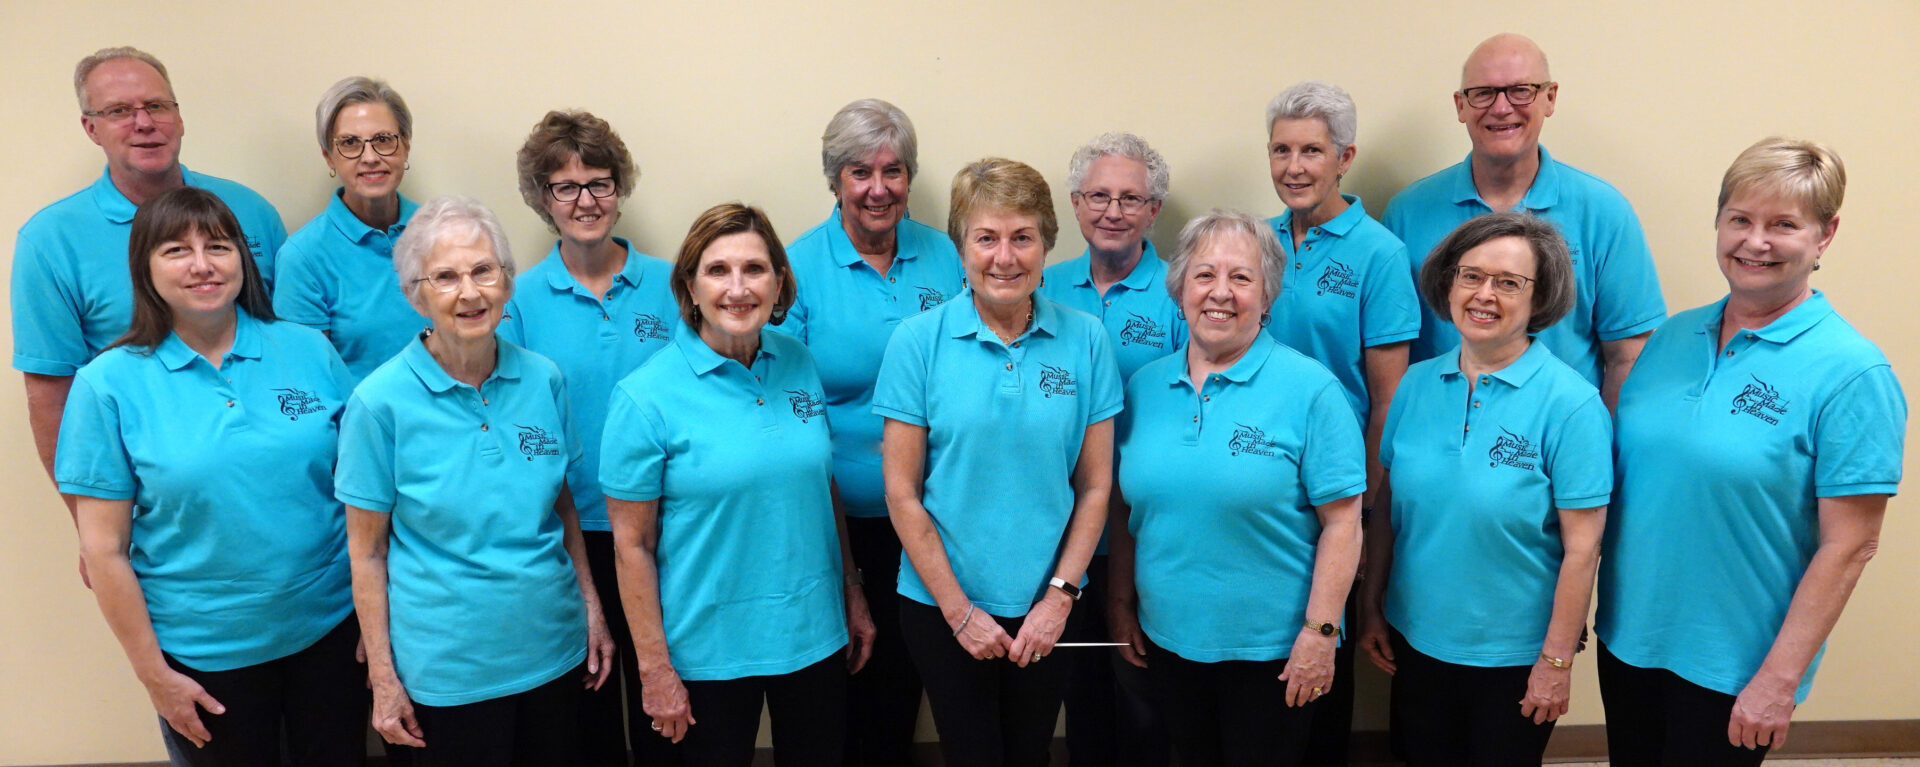 A group of women in blue shirts standing next to each other.